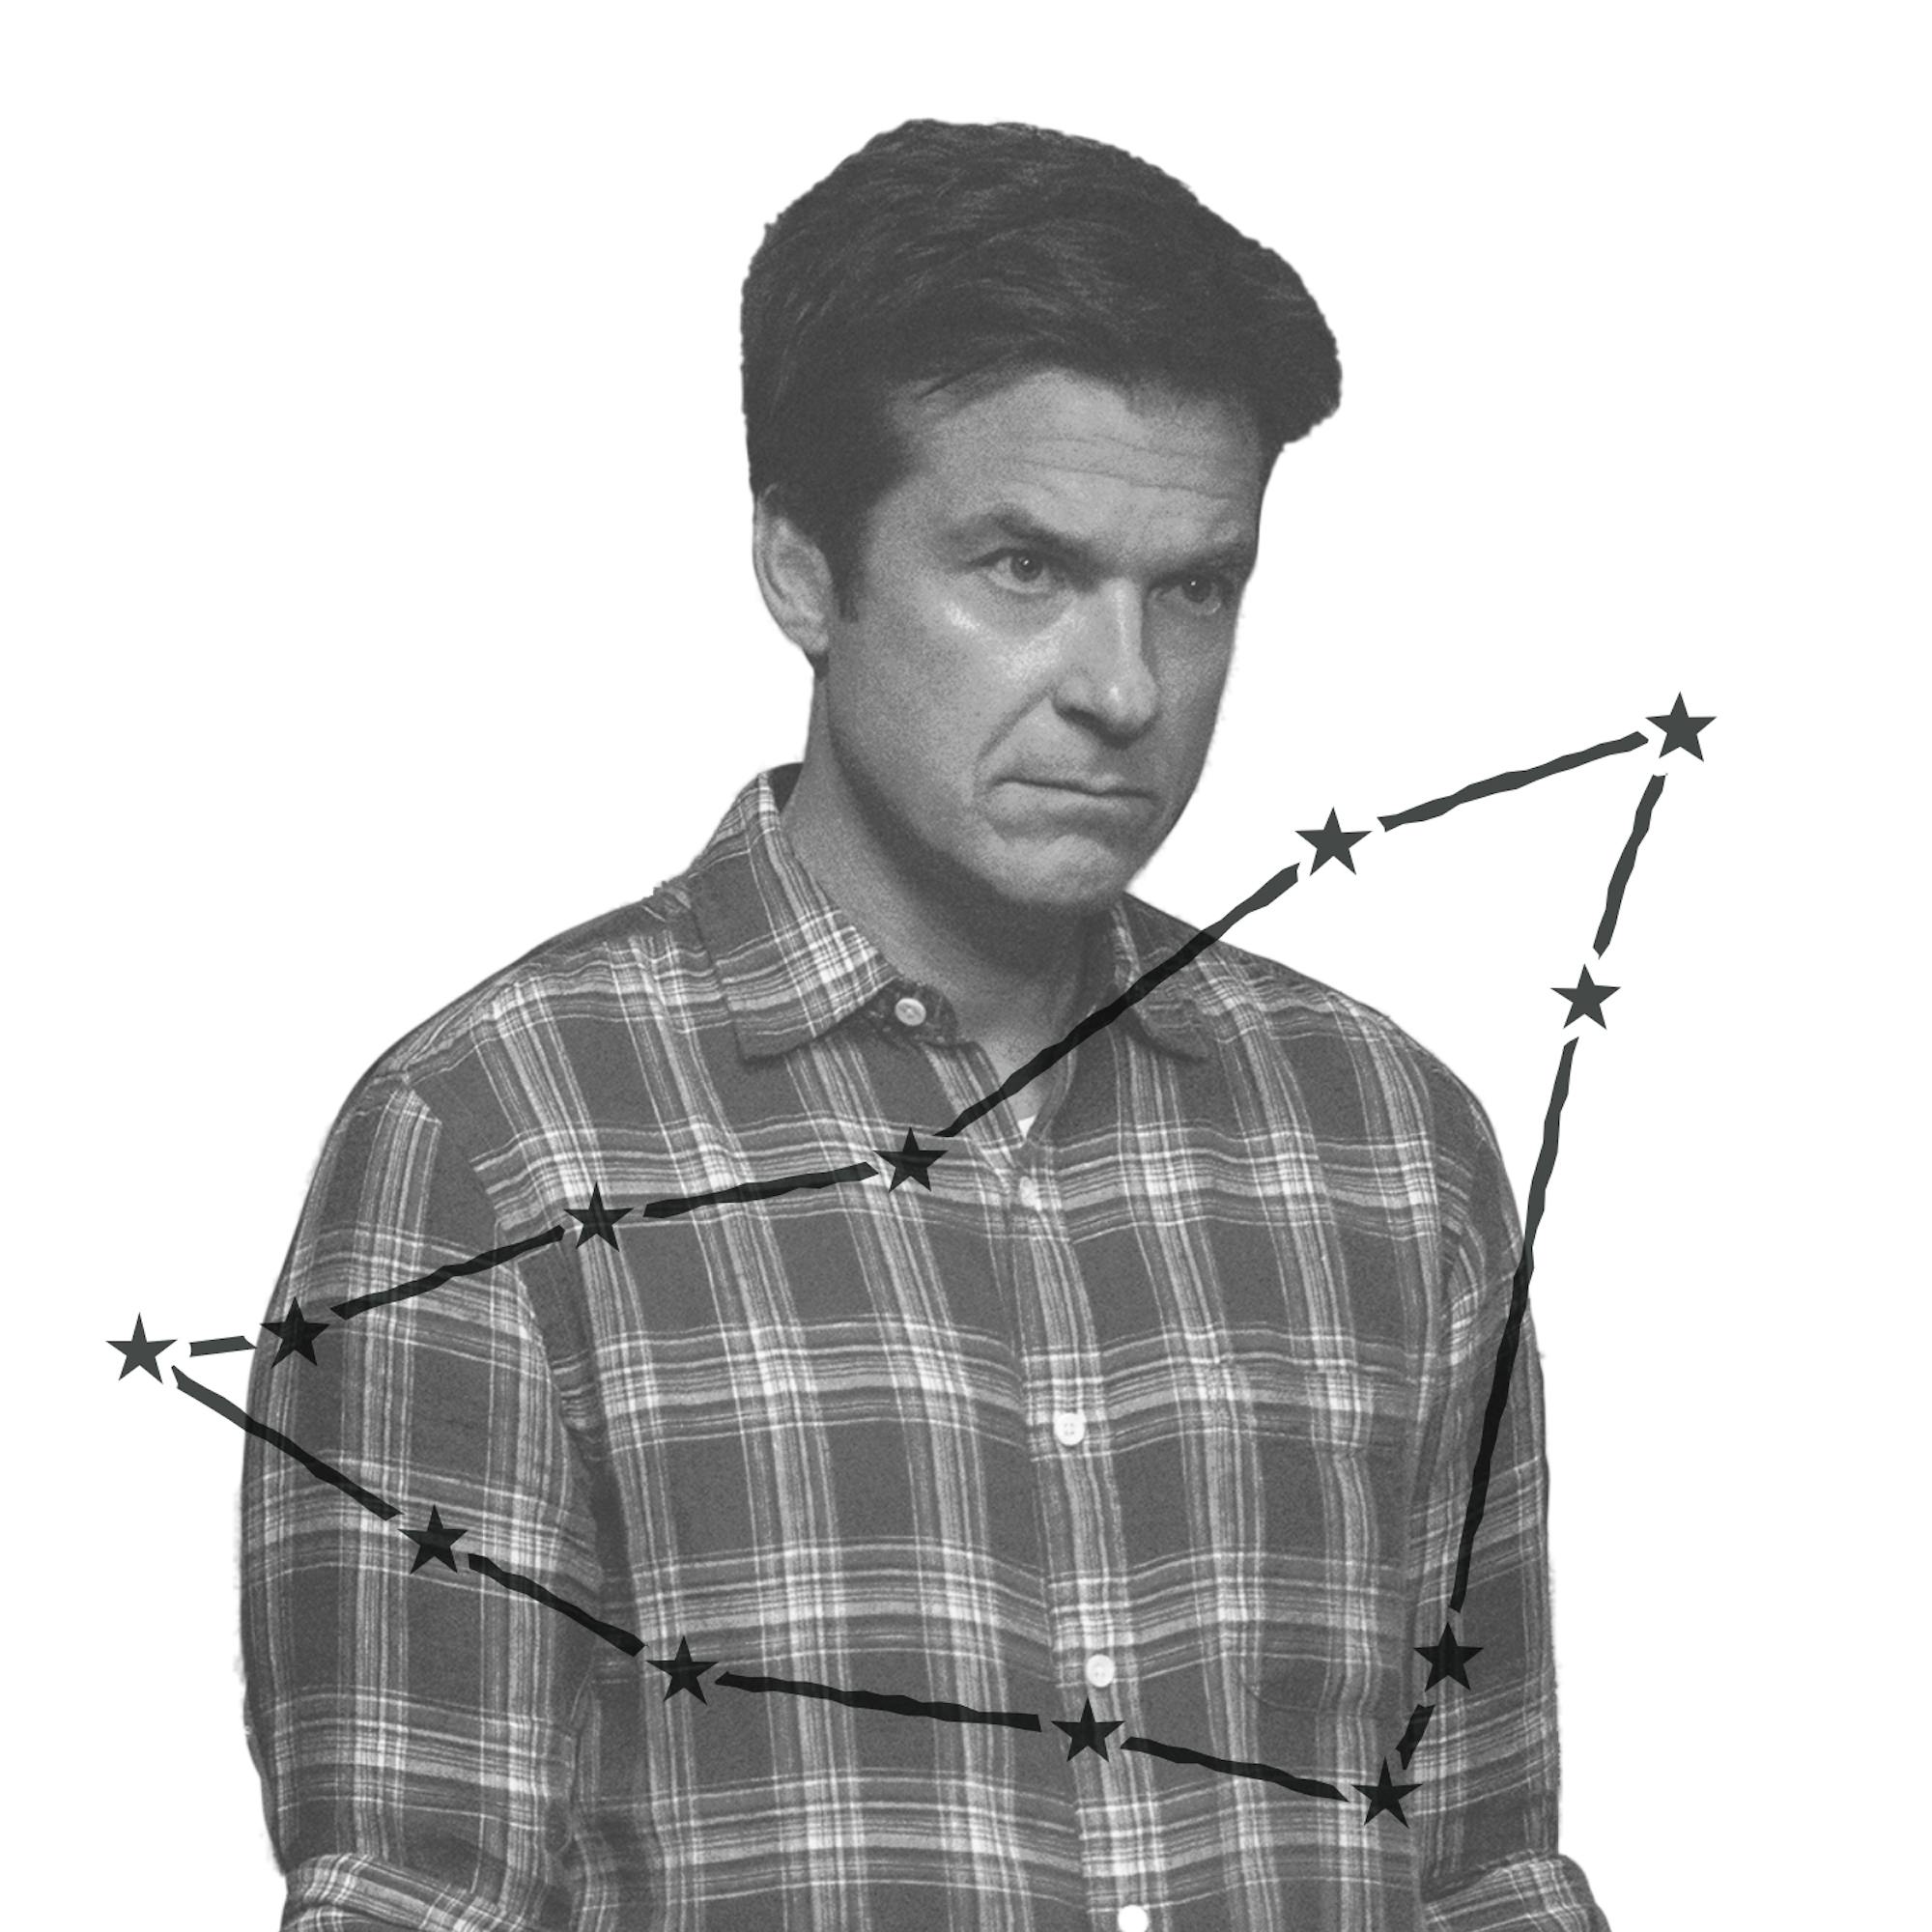 Marty Byrde (played by Jason Bateman) looks downright criminal in his flannel button-down in this still from Ozark. Over the image is an illustration of Marty’s zodiac constellation.